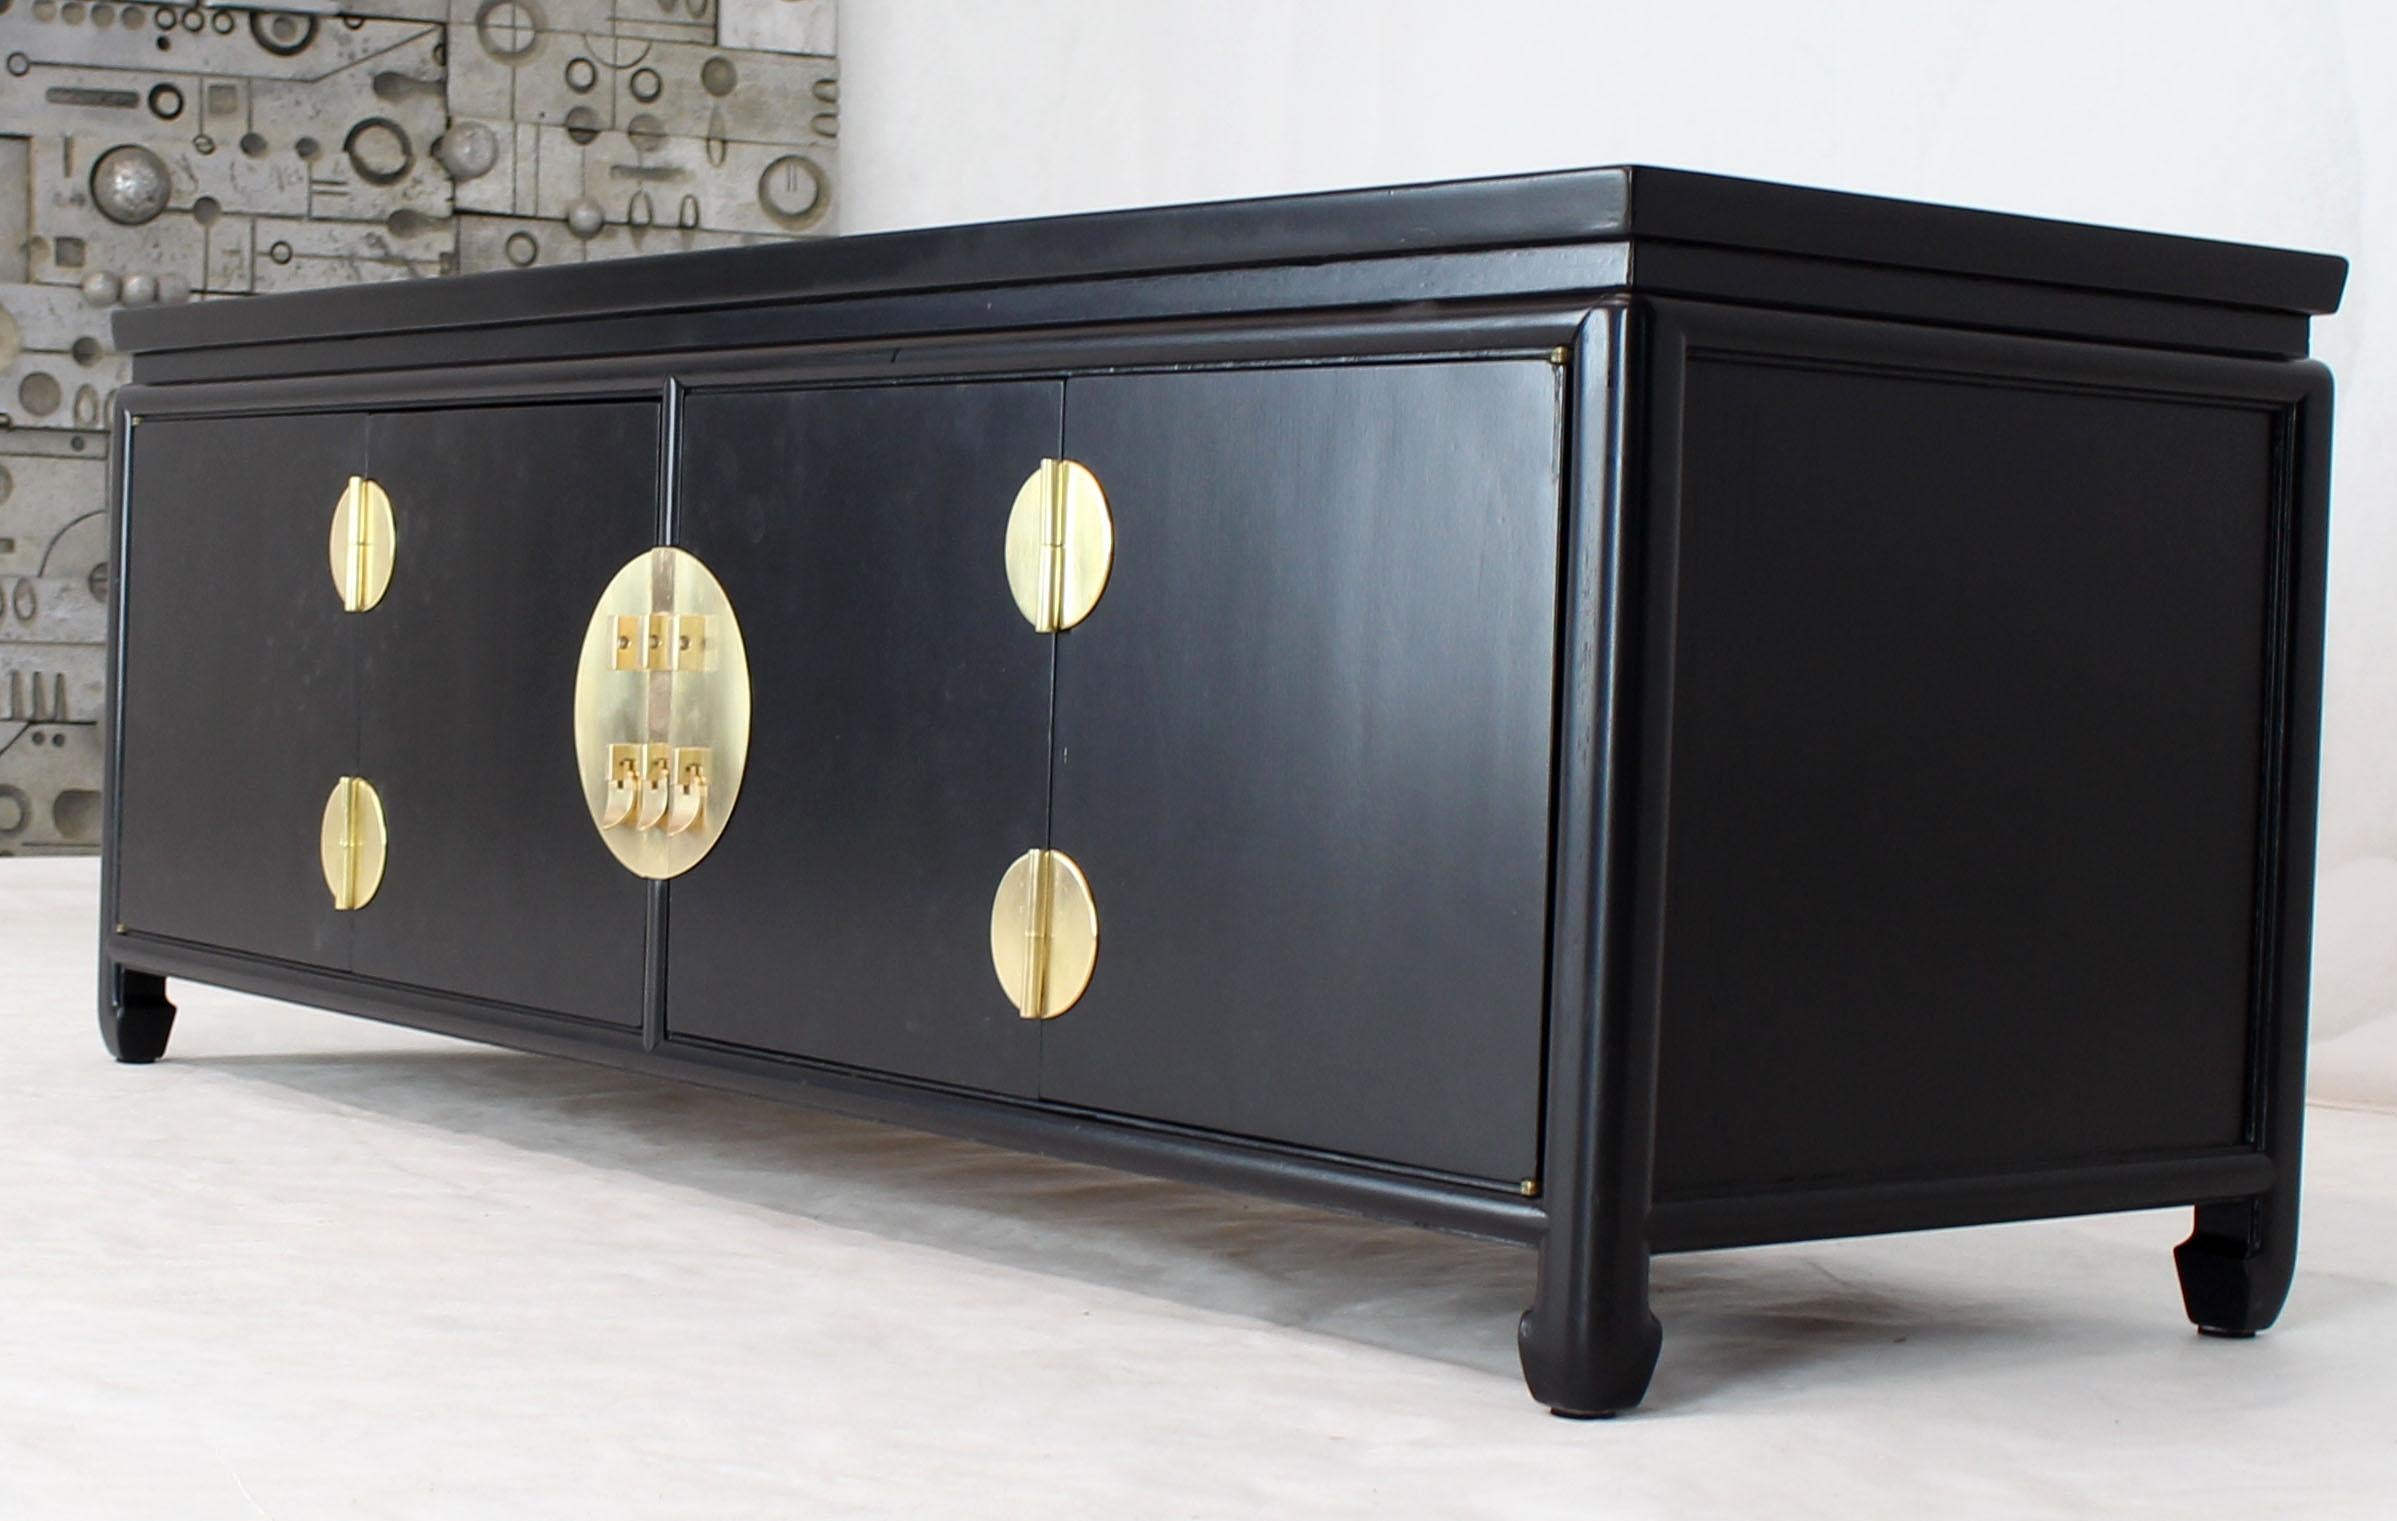 Black Ebonized Low Petite Small Credenza Stand with Solid Brass Hardware Pulls In Excellent Condition For Sale In Rockaway, NJ